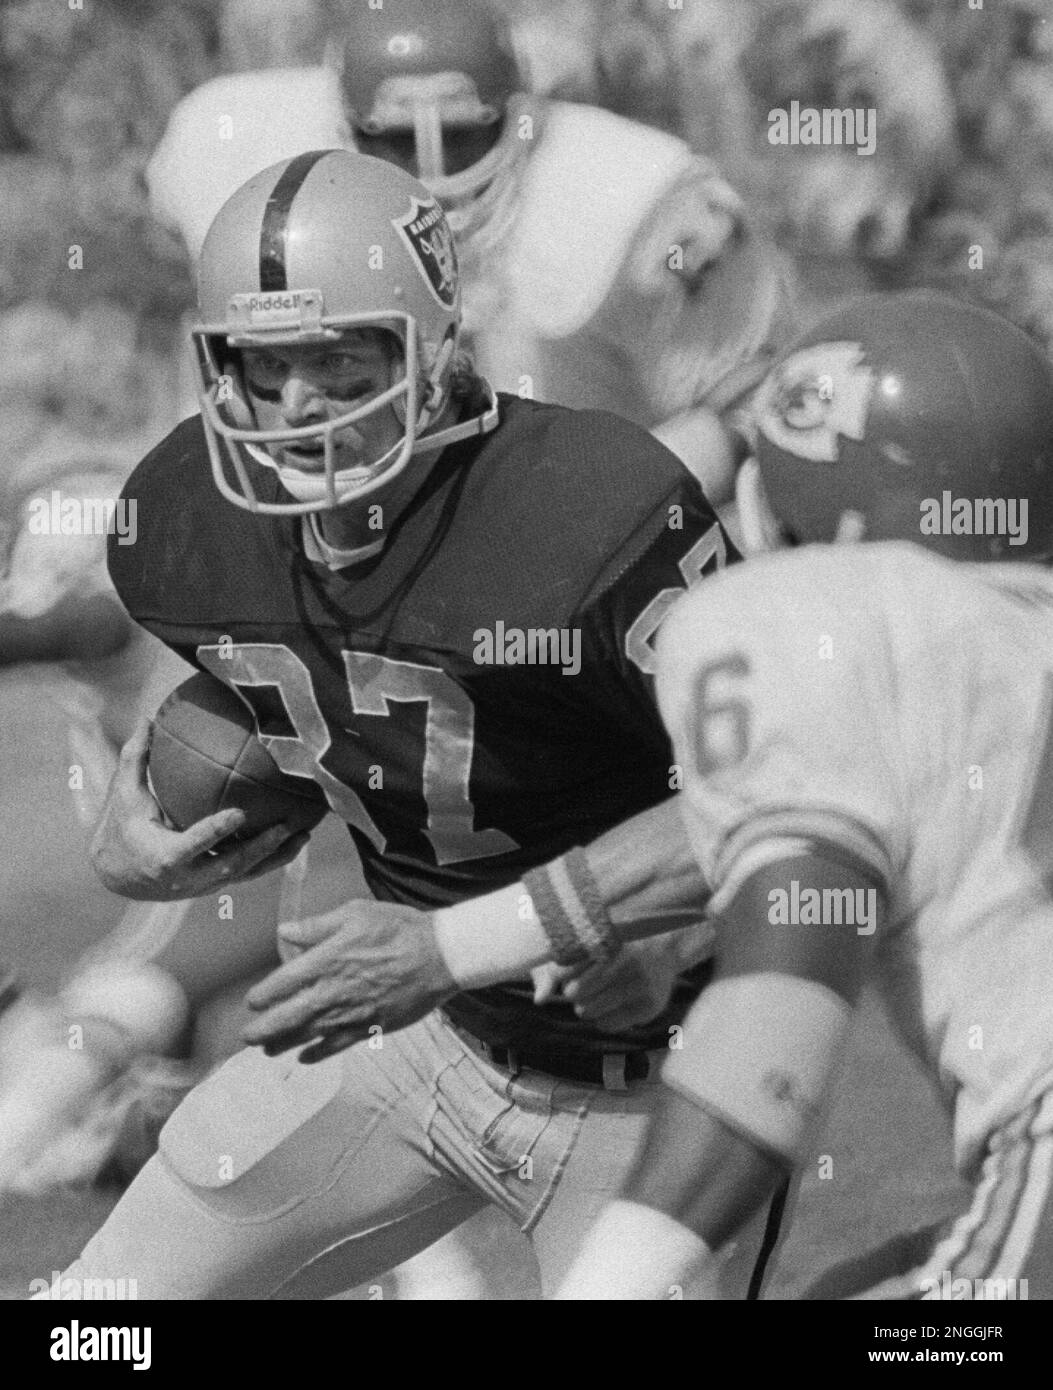 Oakland Raiders tight end Dave Casper, left, carries the ball